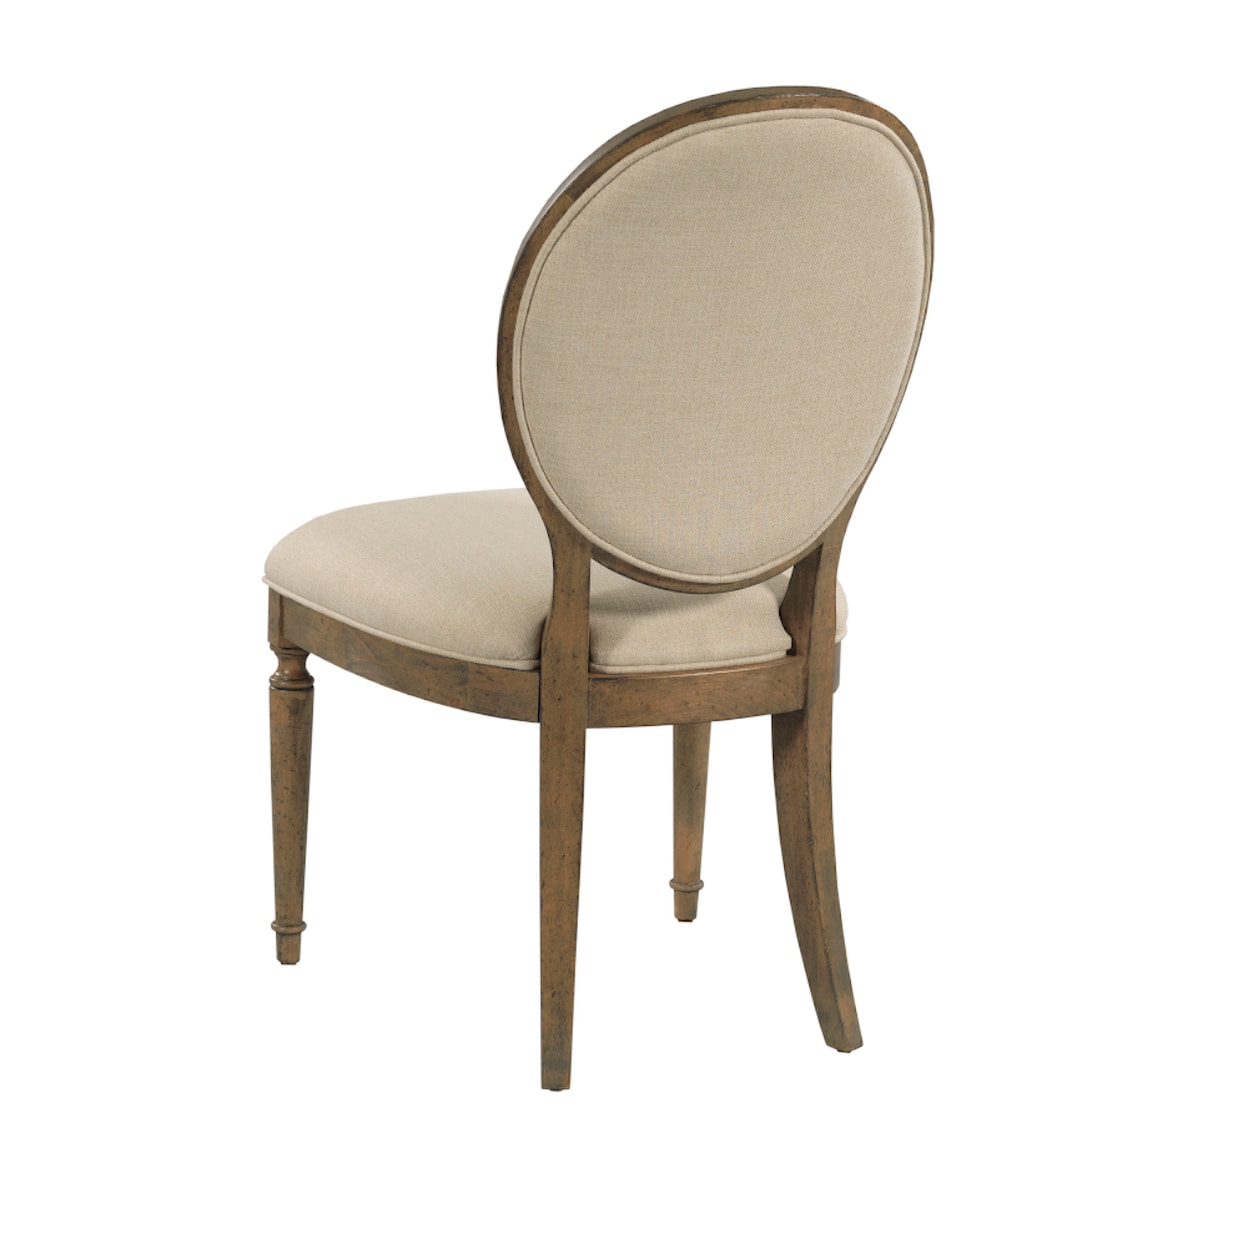 Kincaid Furniture Ansley Cecil Oval Back Uph Side Chair